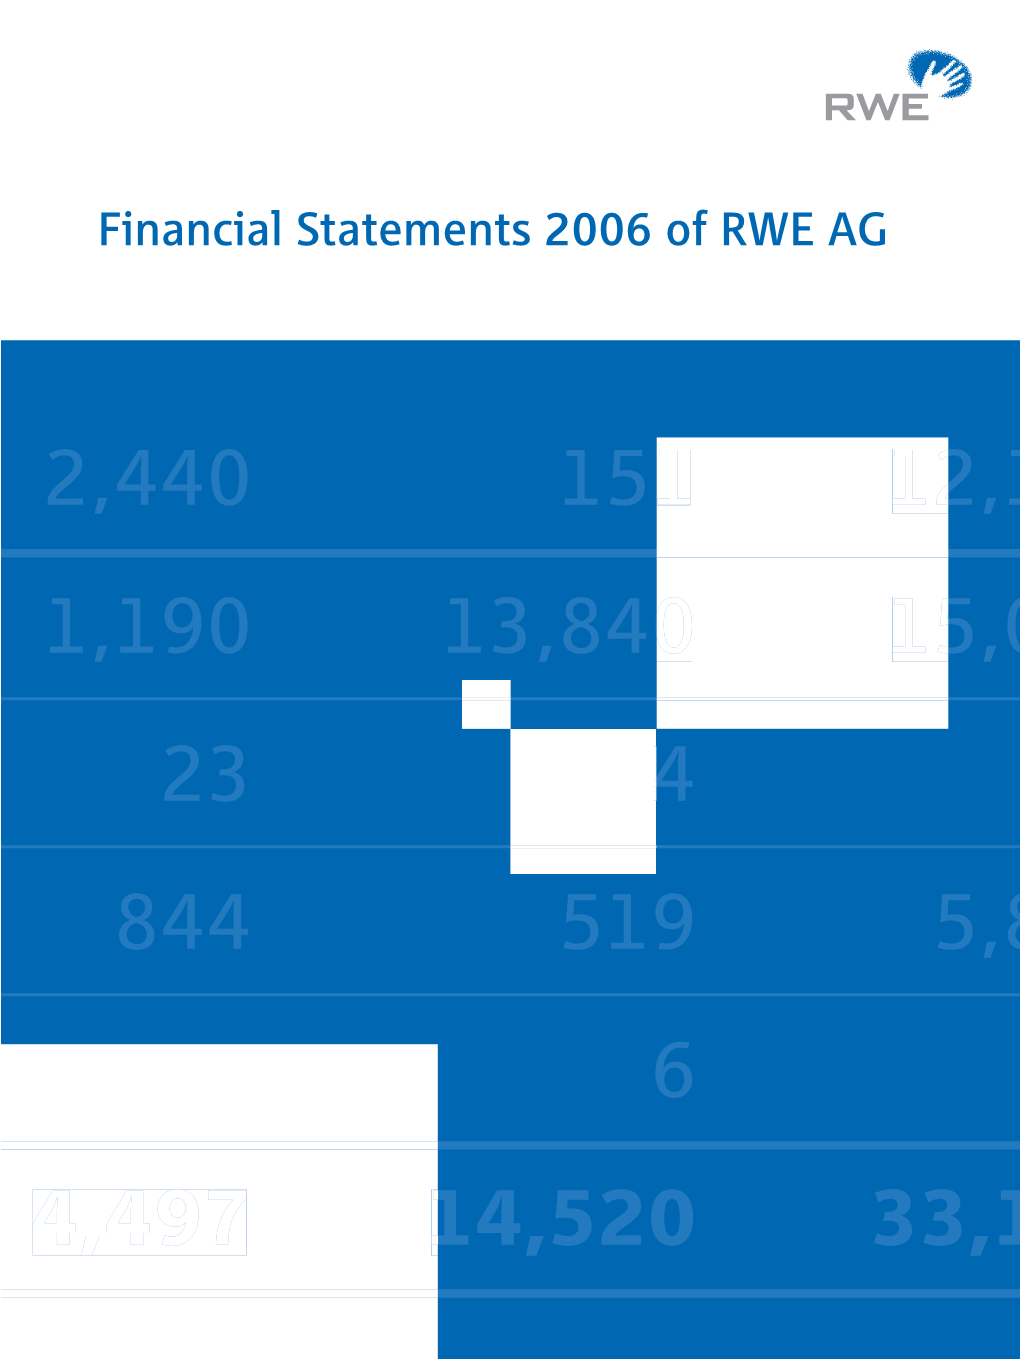 Financial Statements 2006 of RWE AG